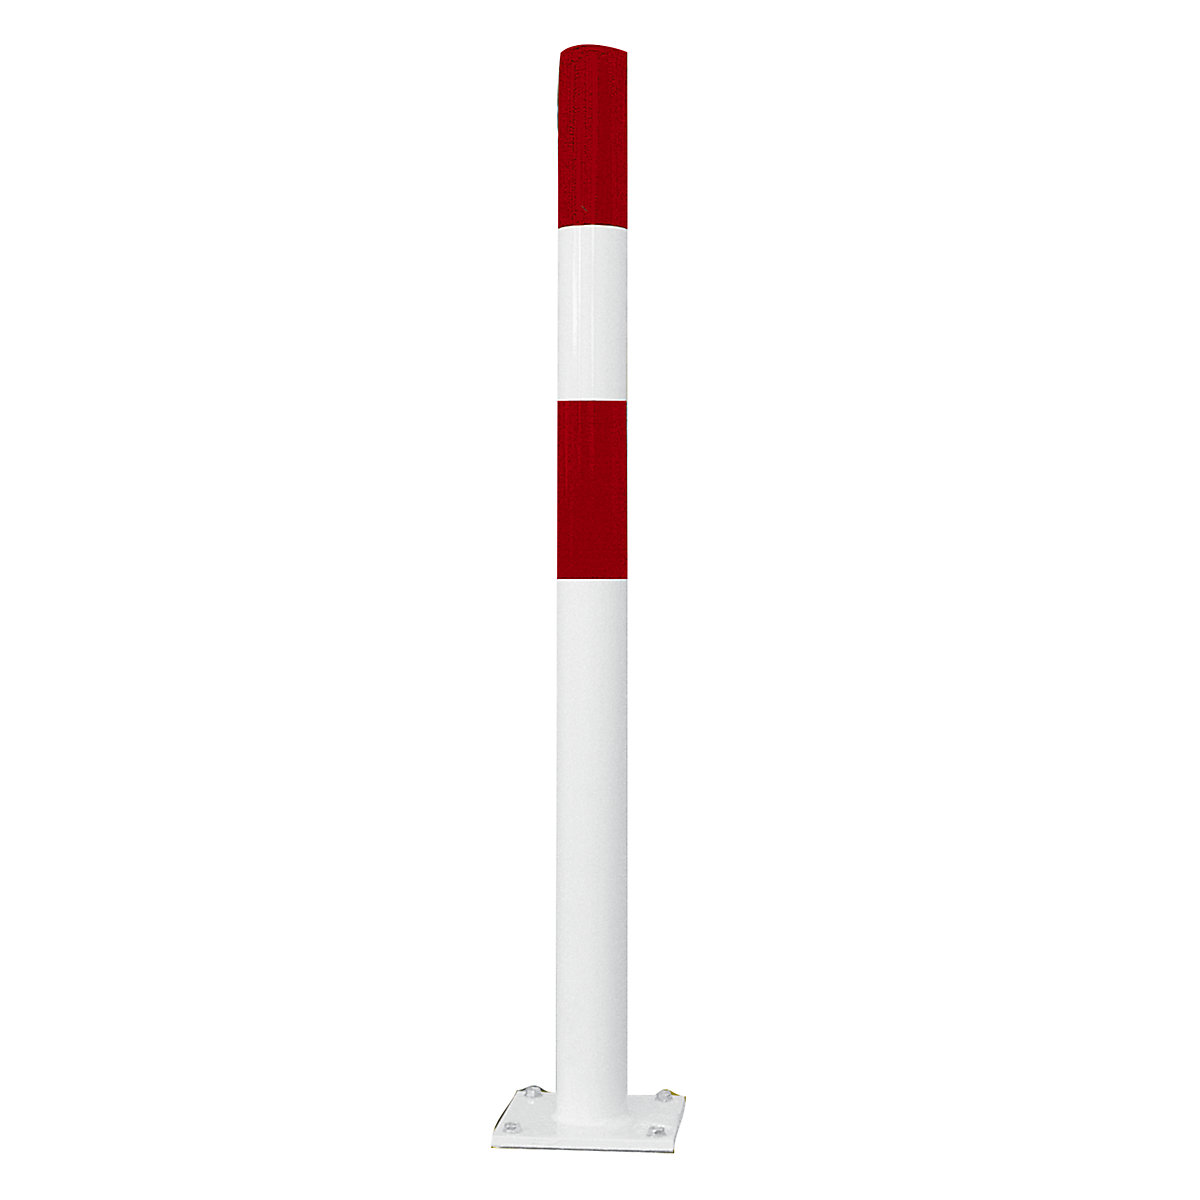 Crash protection bollard, size S, red/white, for bolting in place-1